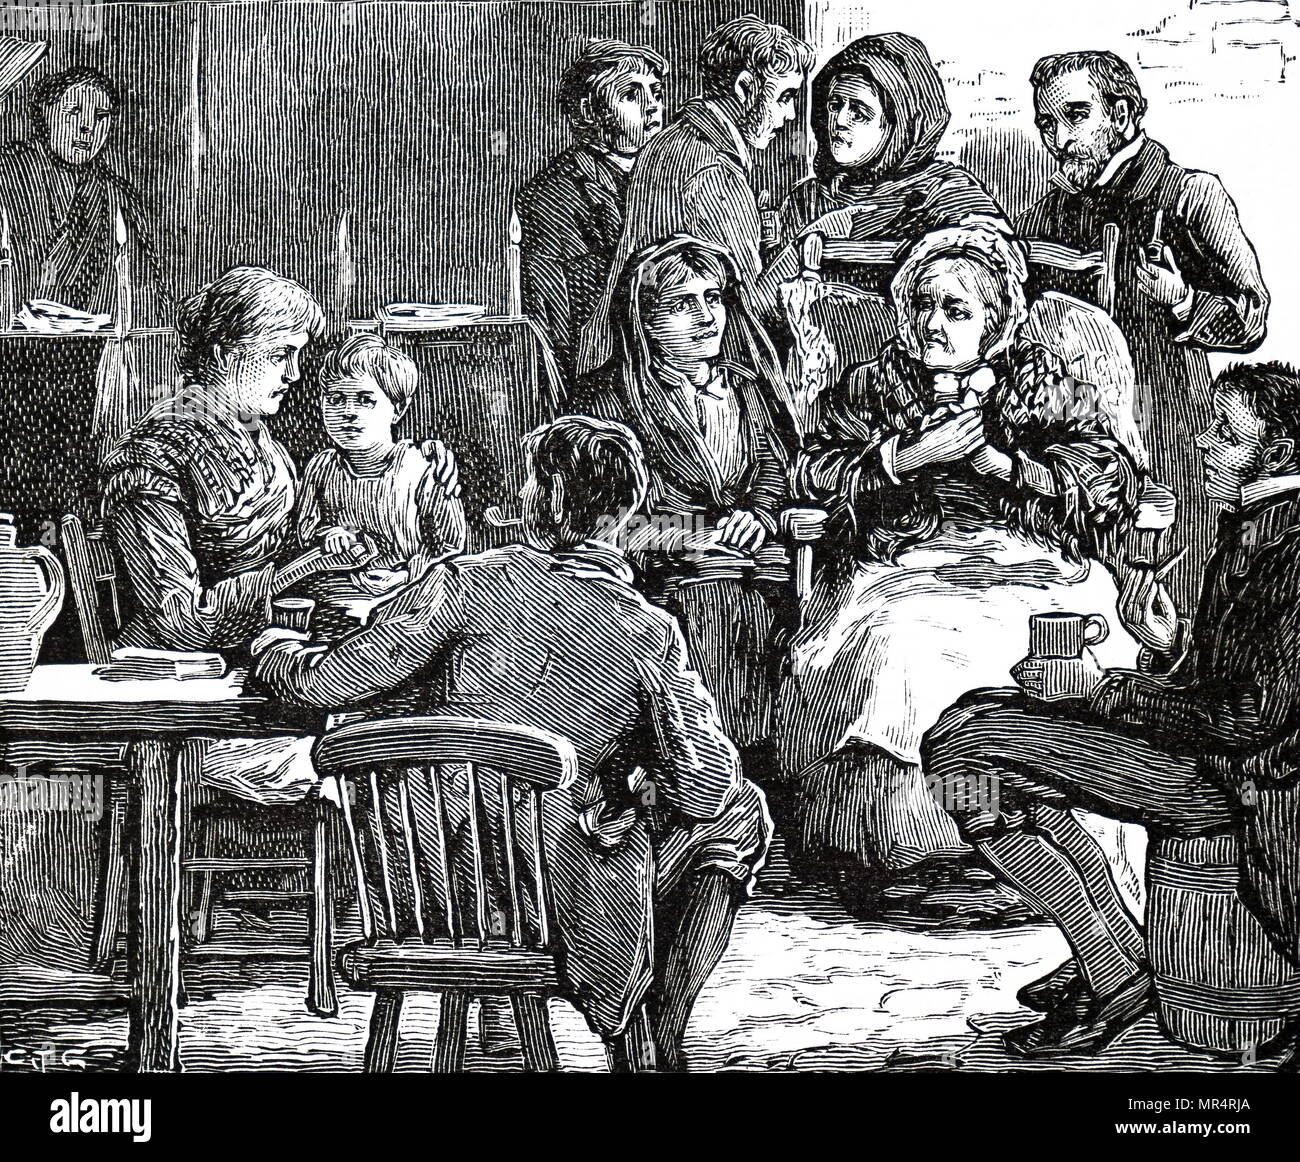 Engraving depicting an evening wake for the wife of an Irish cottager. Friends and relations and neighbours gather round the women's coffin to mourn. Dated 19th century Stock Photo